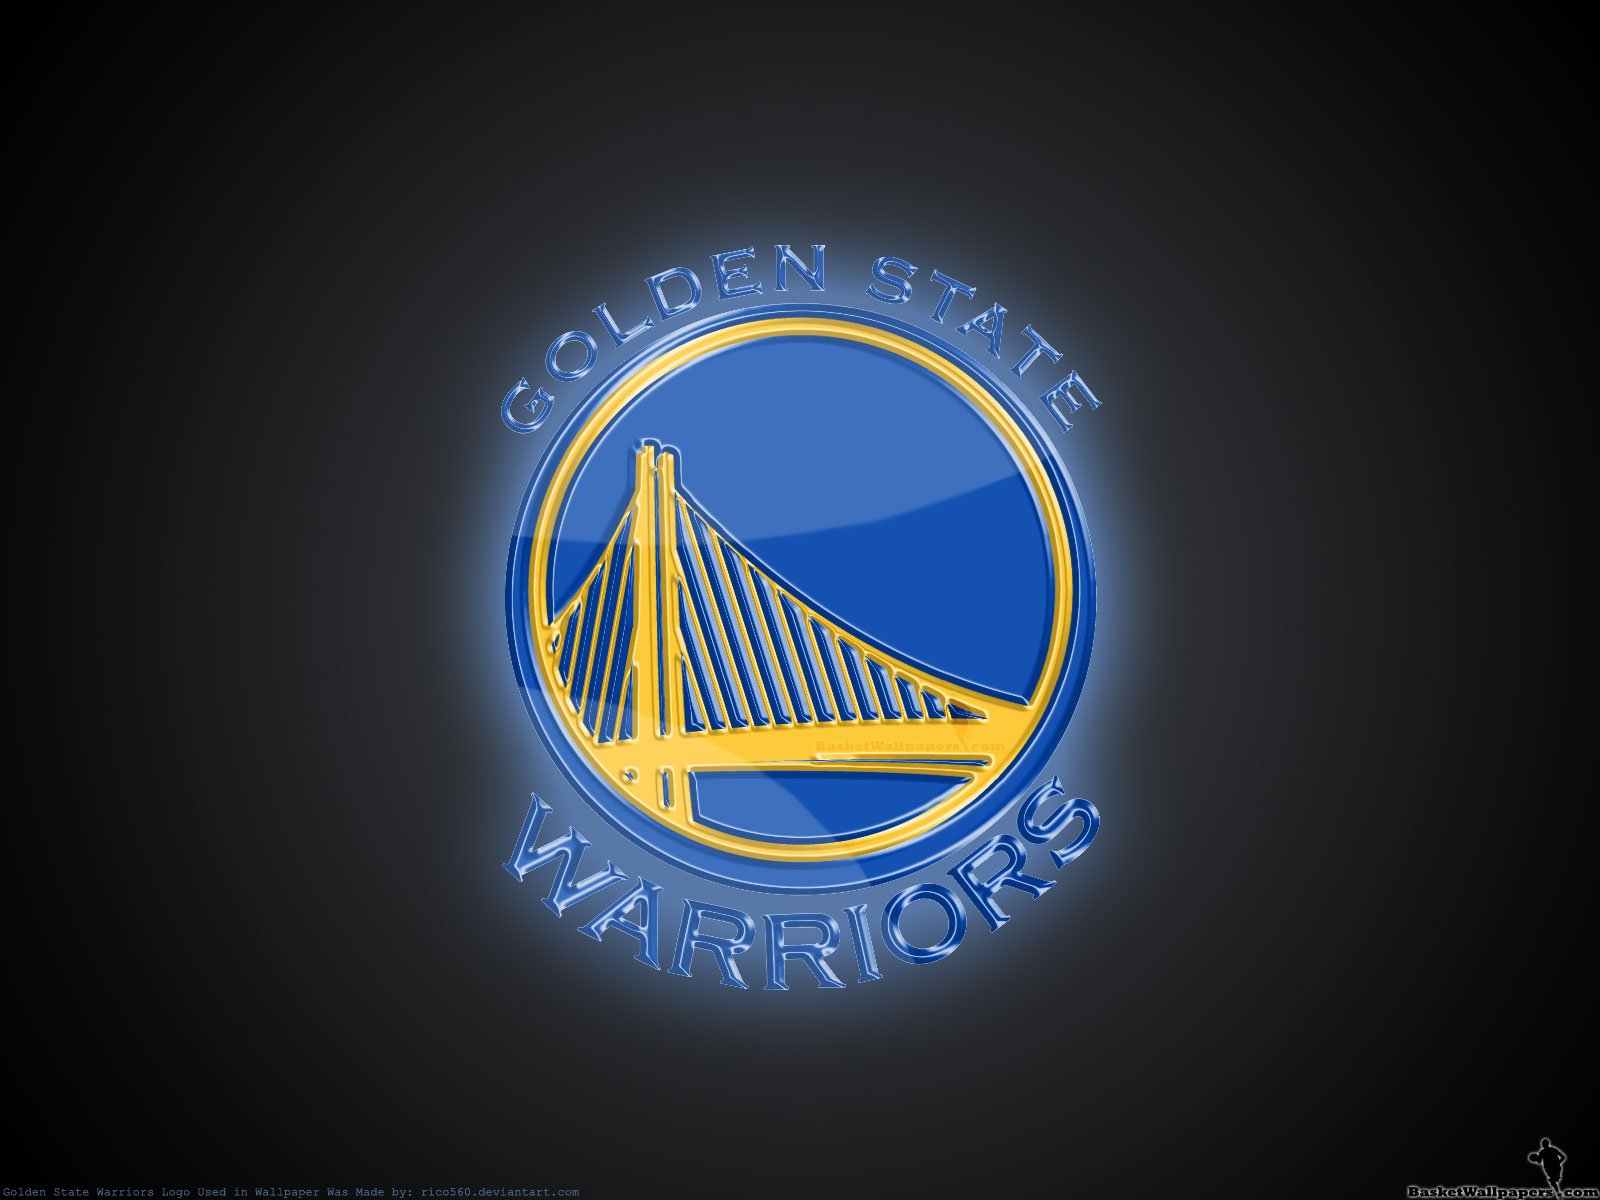 GOLDEN STATE WARRIORS Wallpapers at BasketWallpapers.com